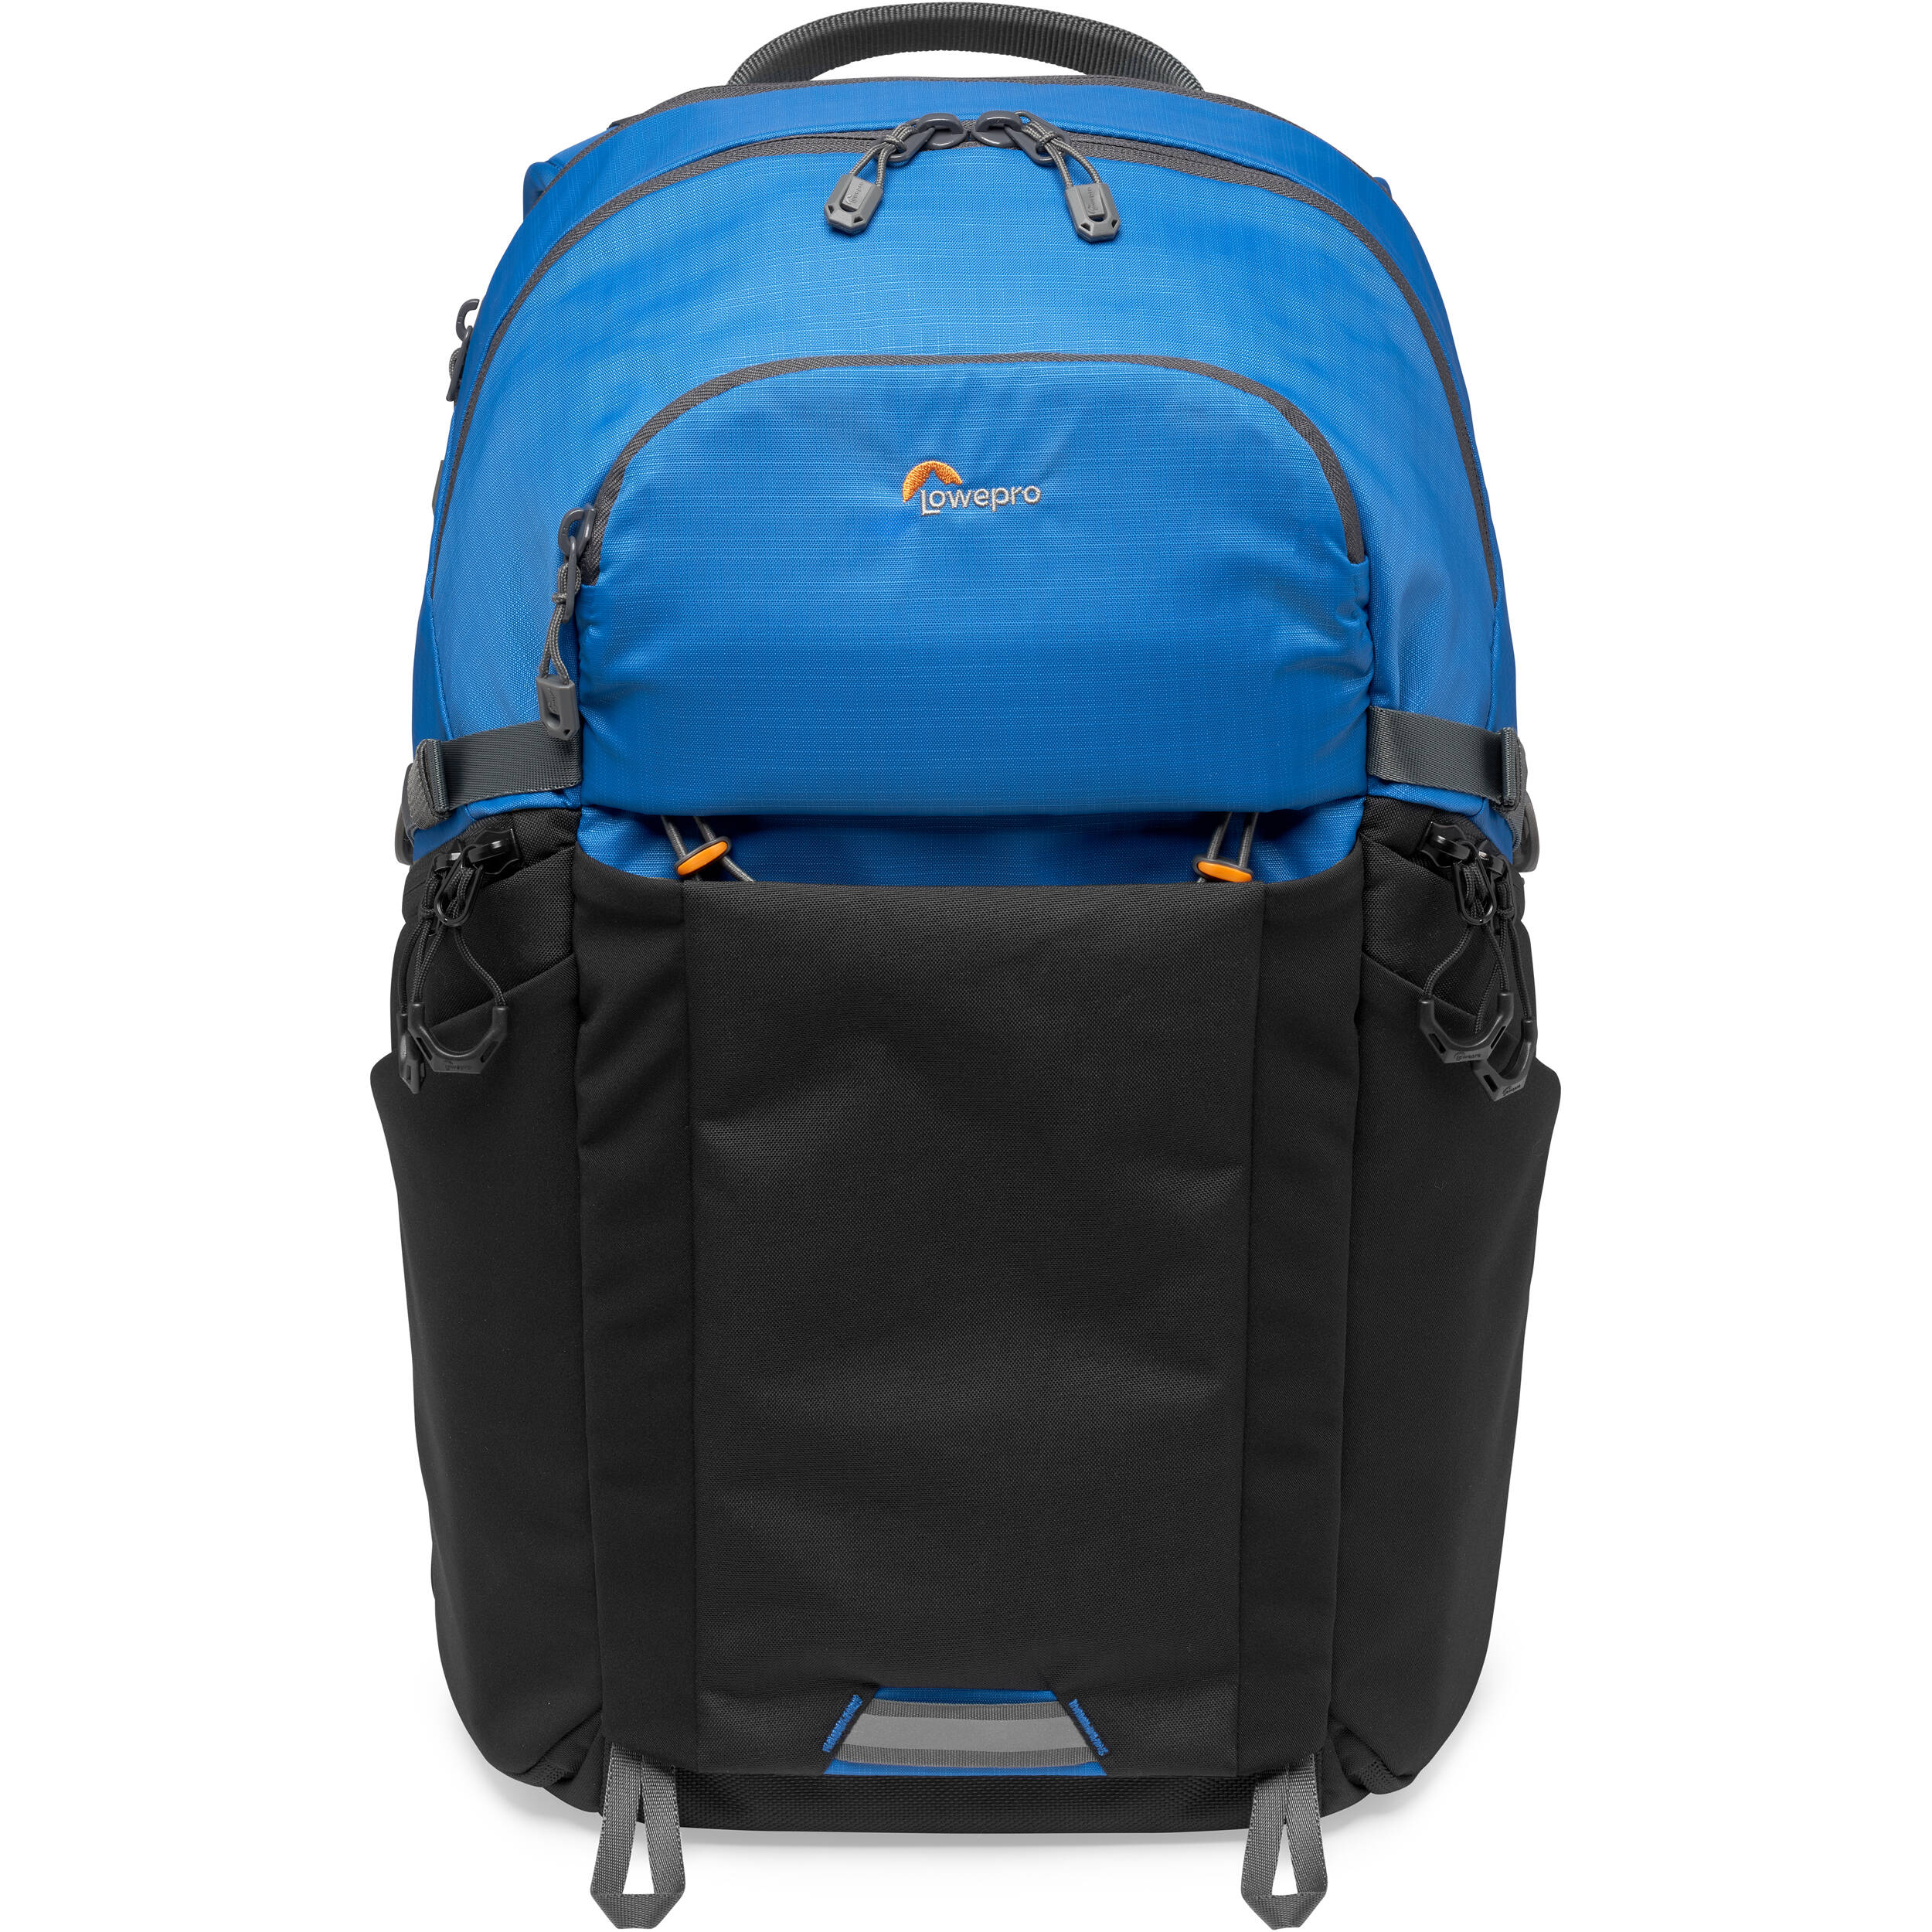 Lowepro Photo Active BP Backpack - 300 AW - Blue